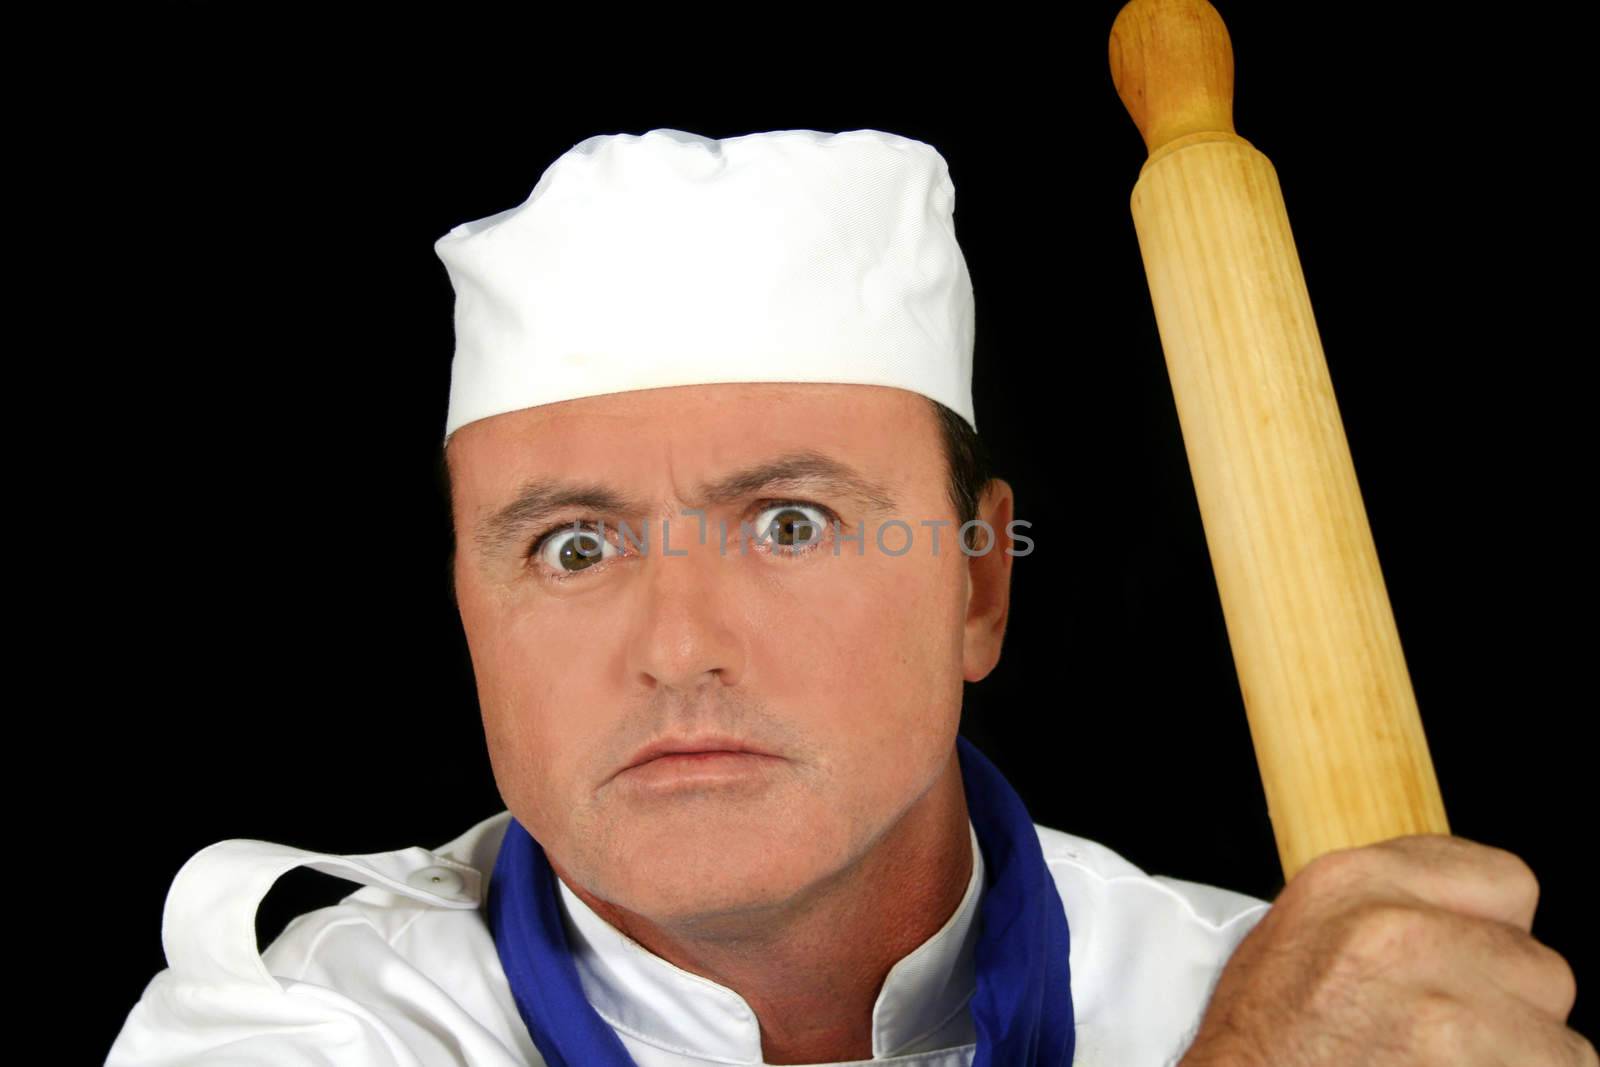 Very angry chef makes his presence felt.